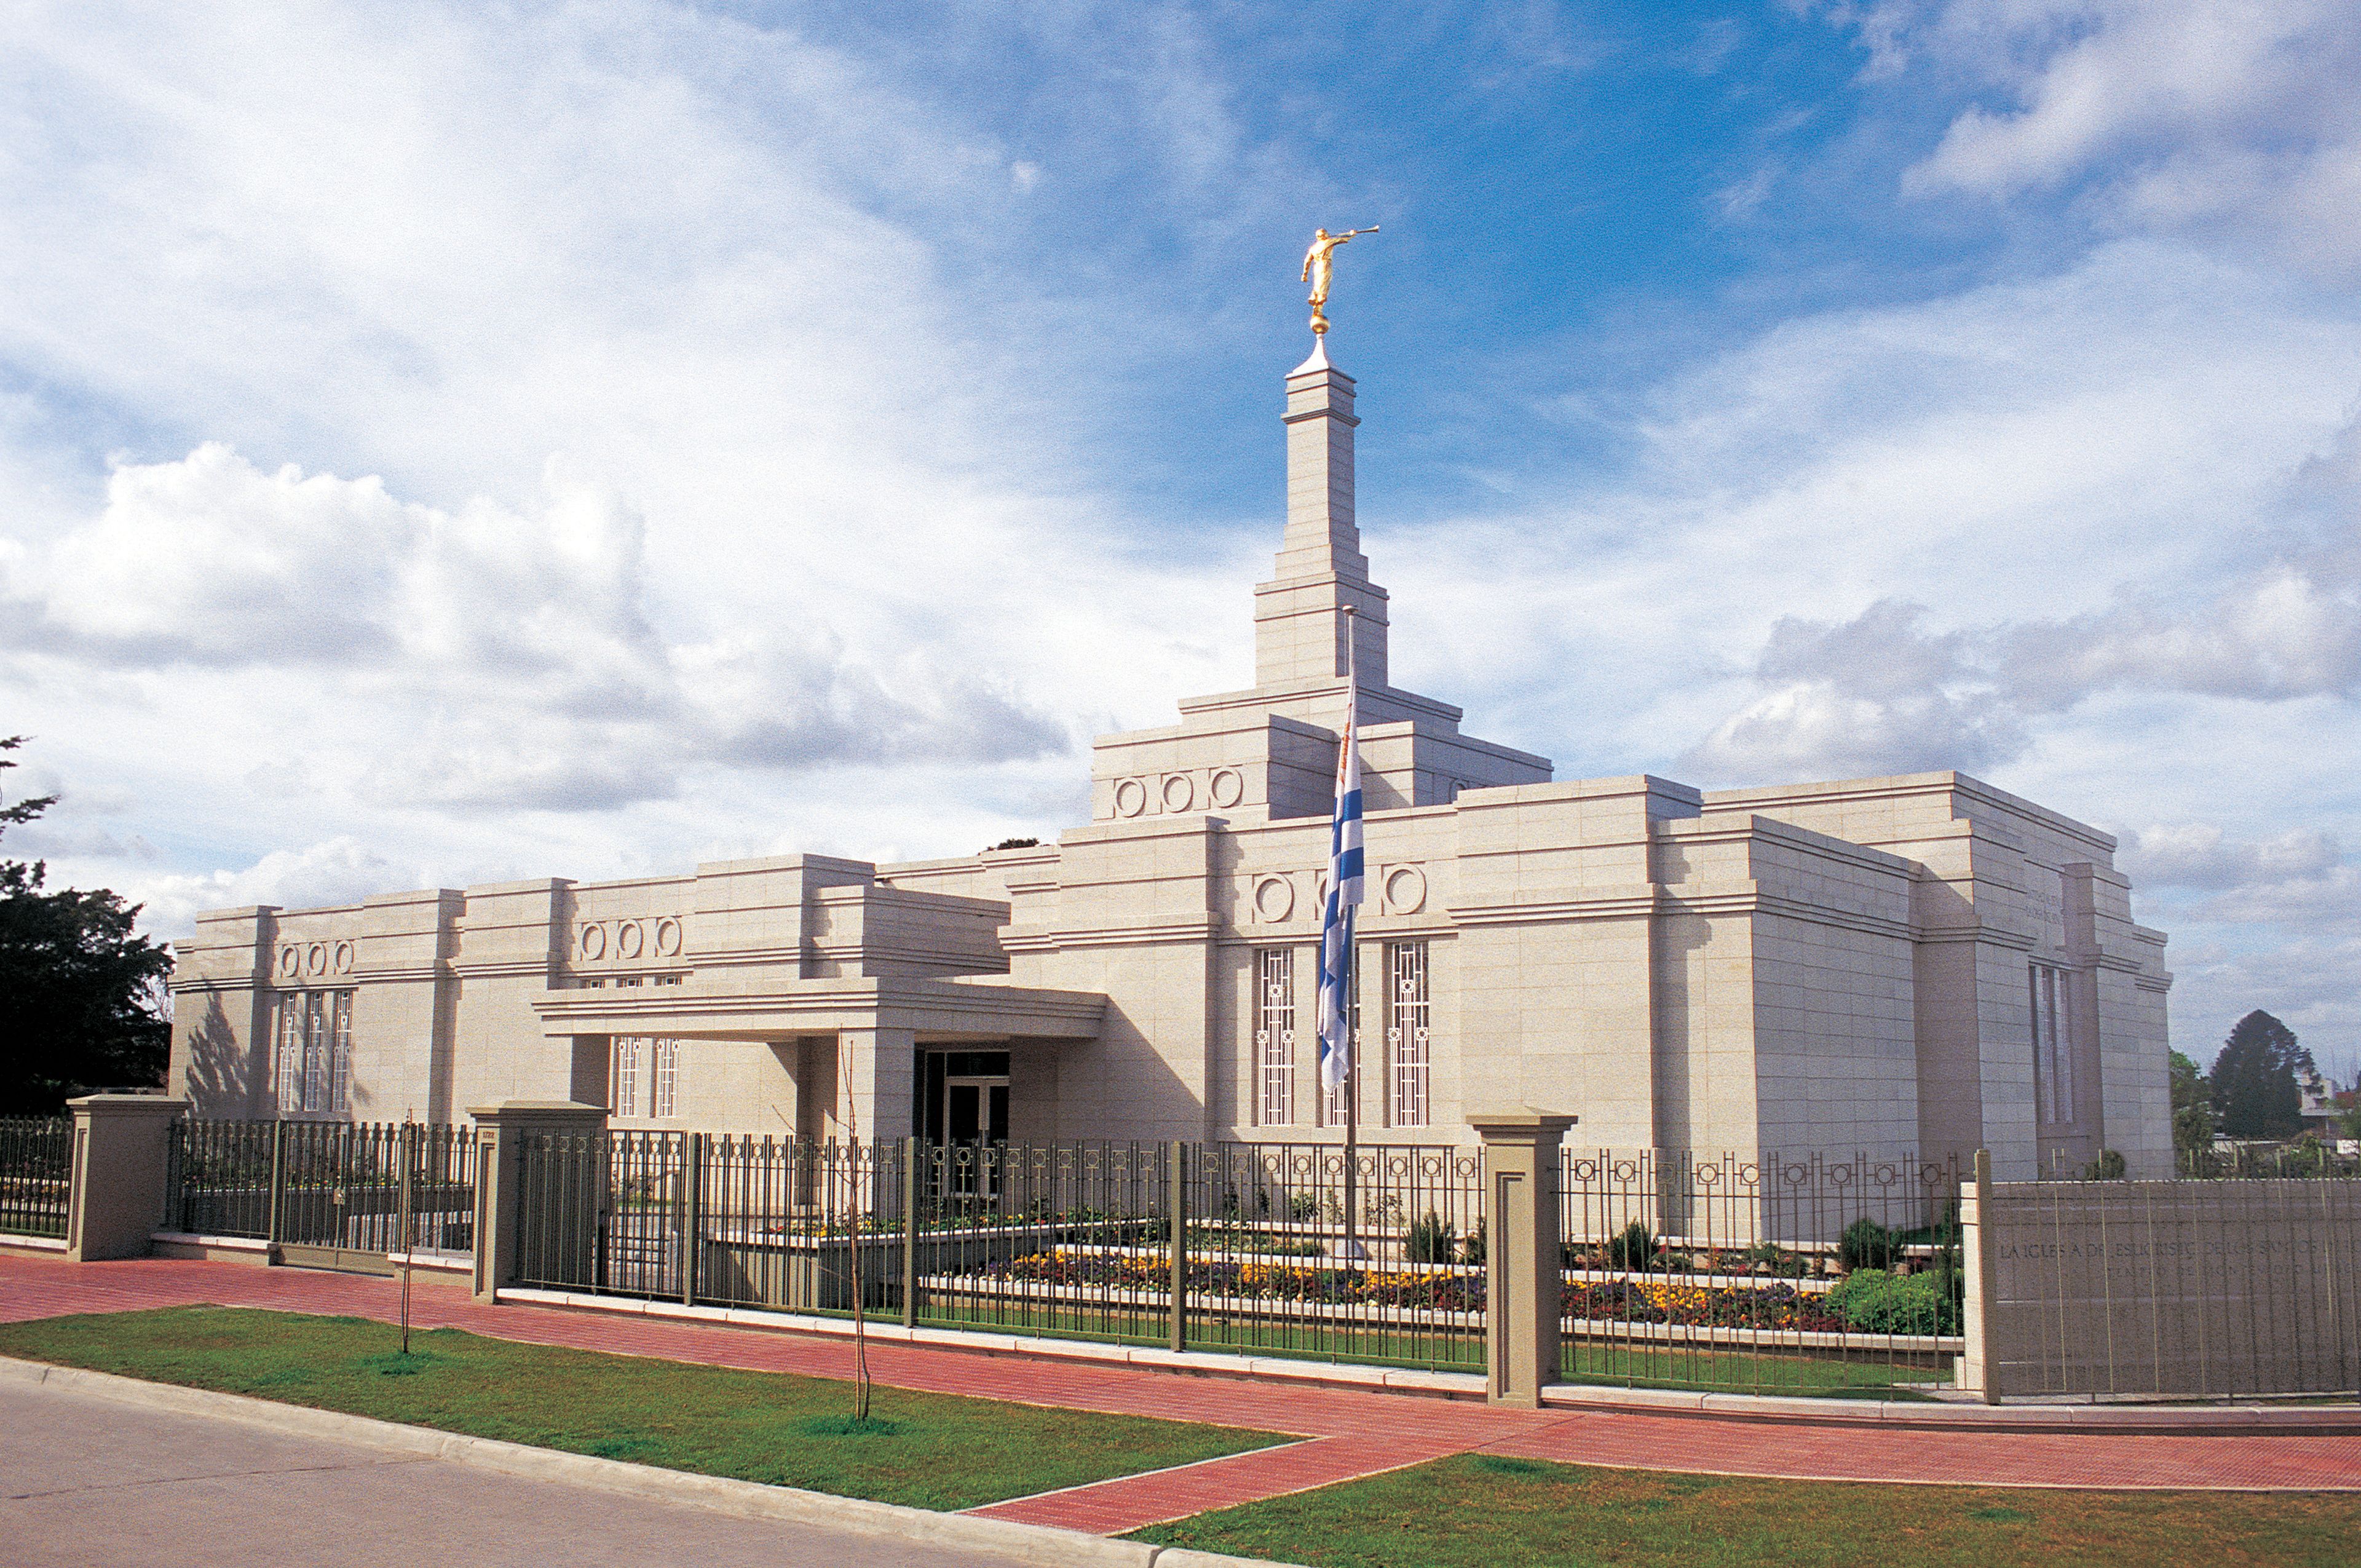 The Montevideo Uruguay Temple, including the entrance and scenery.